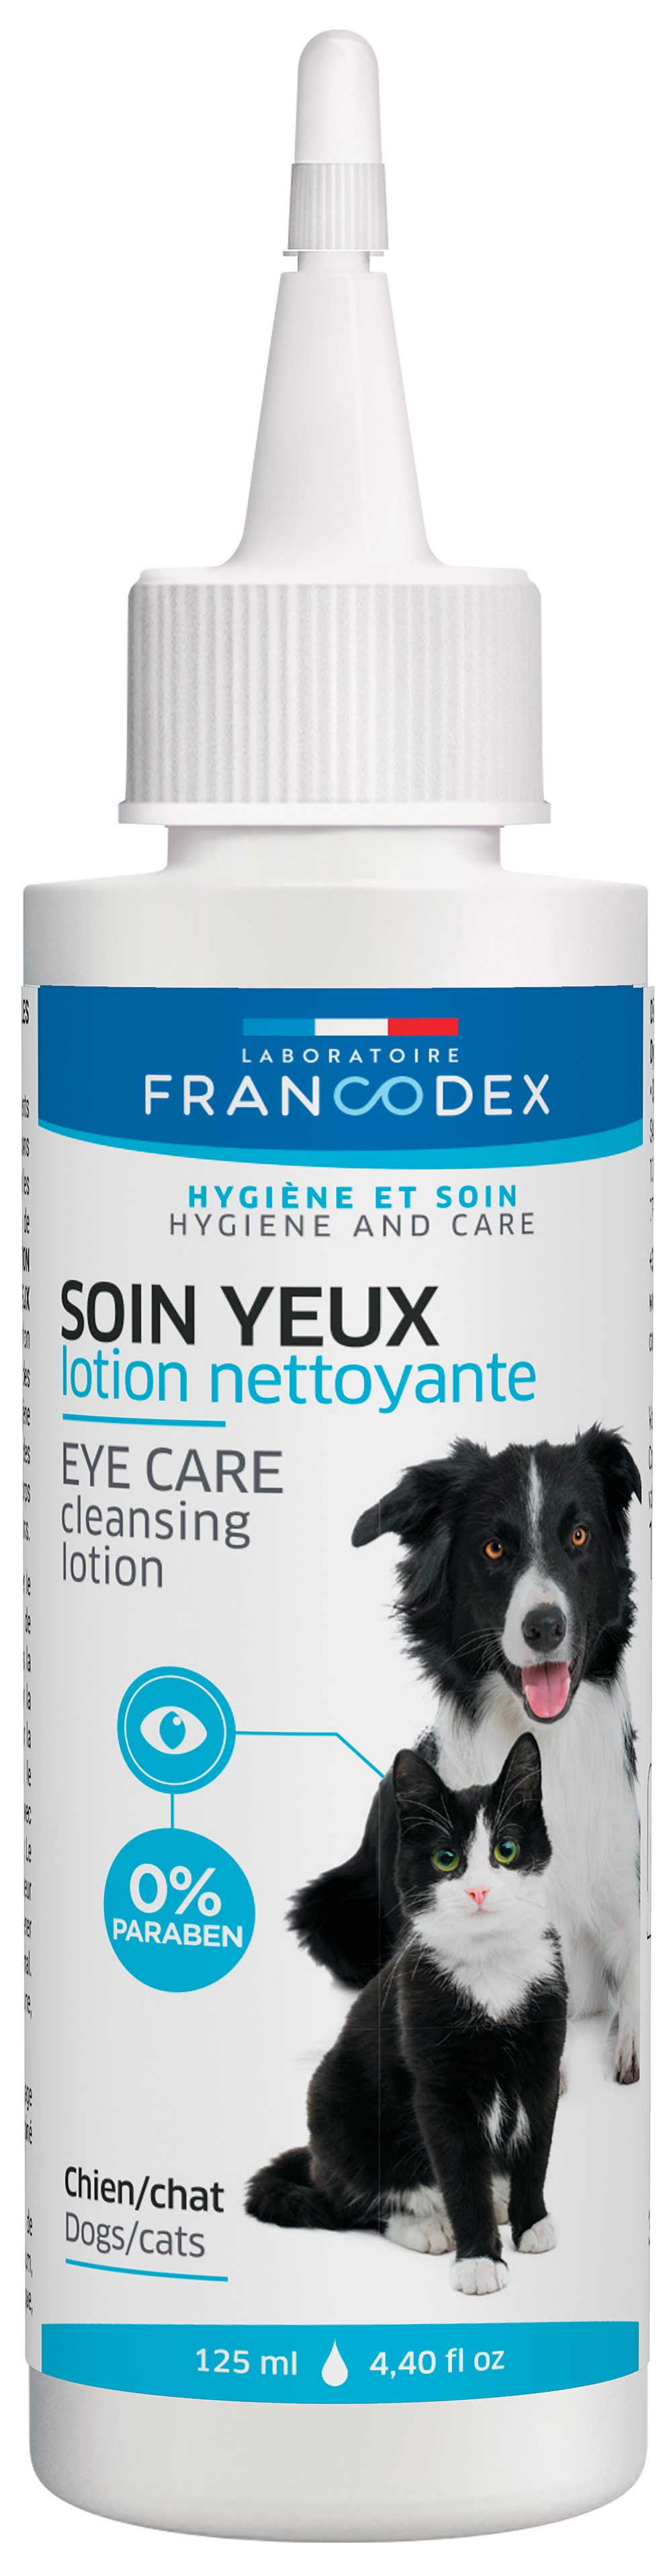 Lotion nettoyante yeux chien chat 125ml